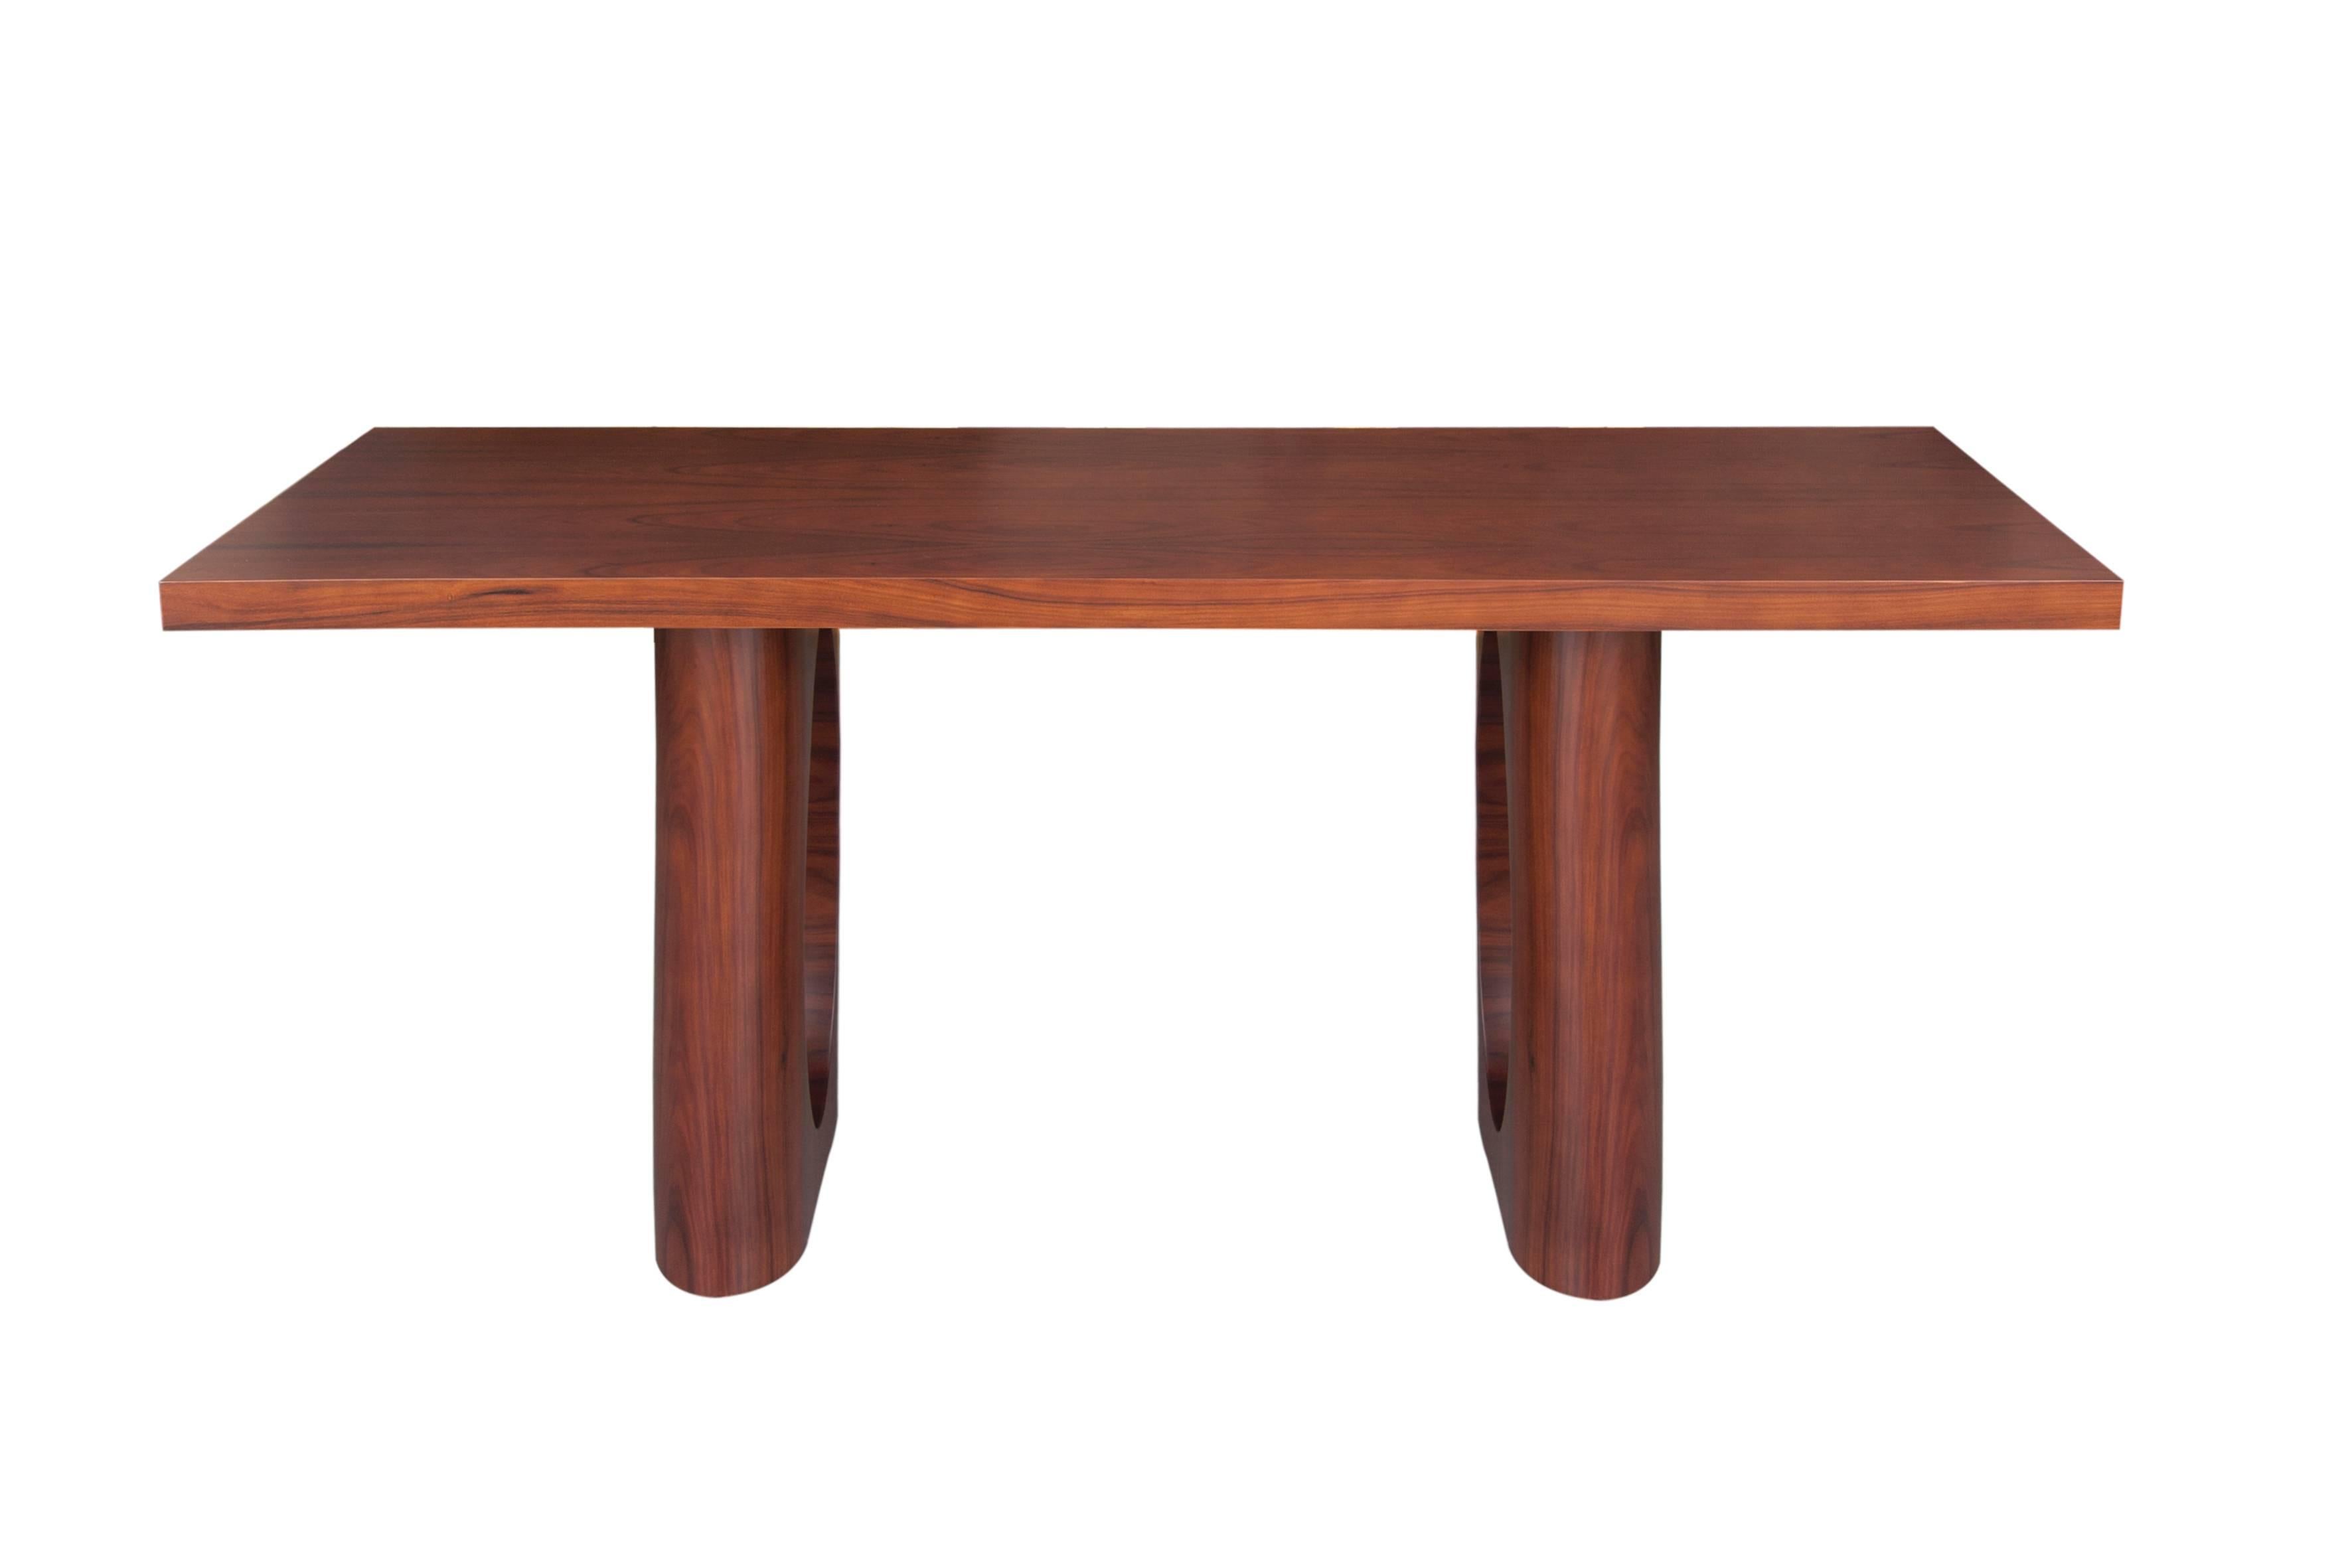 French Large Walnut or Oak Wood or Lacquer Rectangular Modern Dining Table from France For Sale